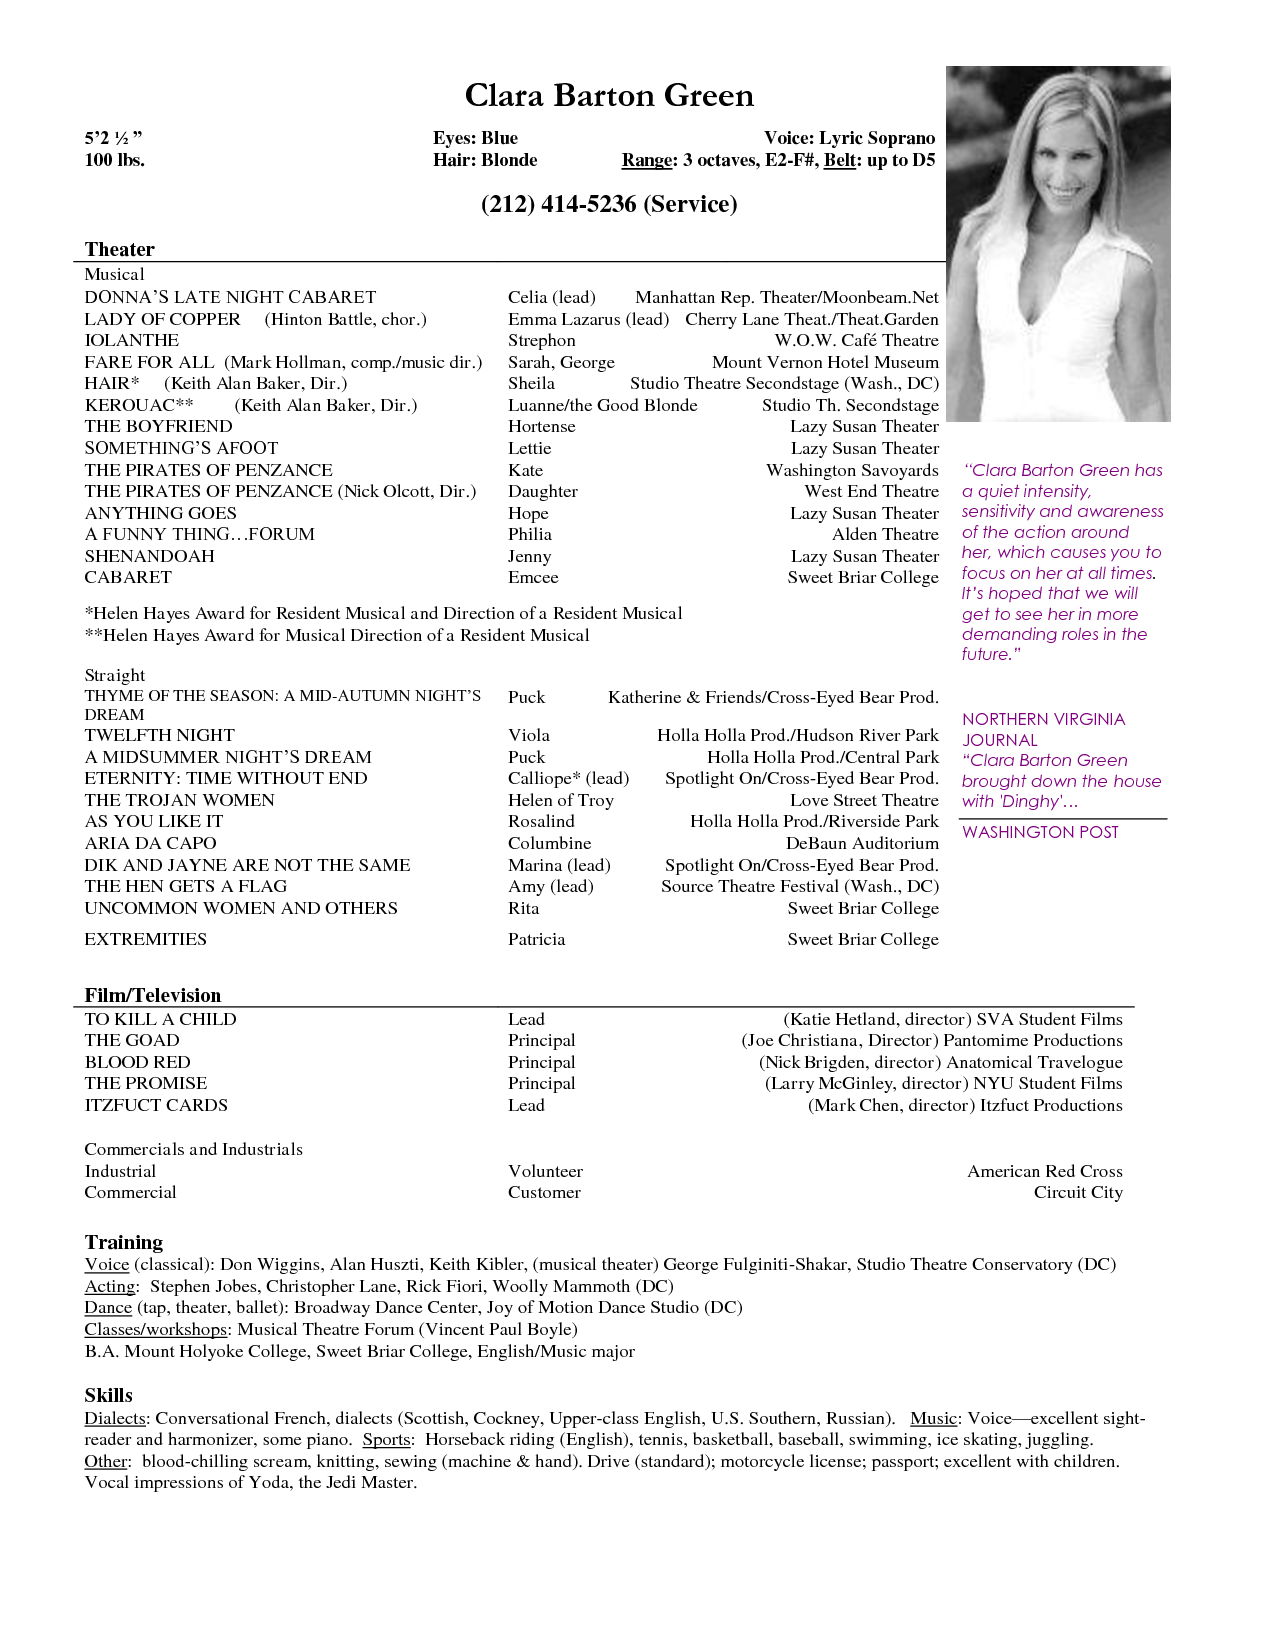 Theatre Resume Samples Daway Dabrowa Co Musical Template | amypark.us